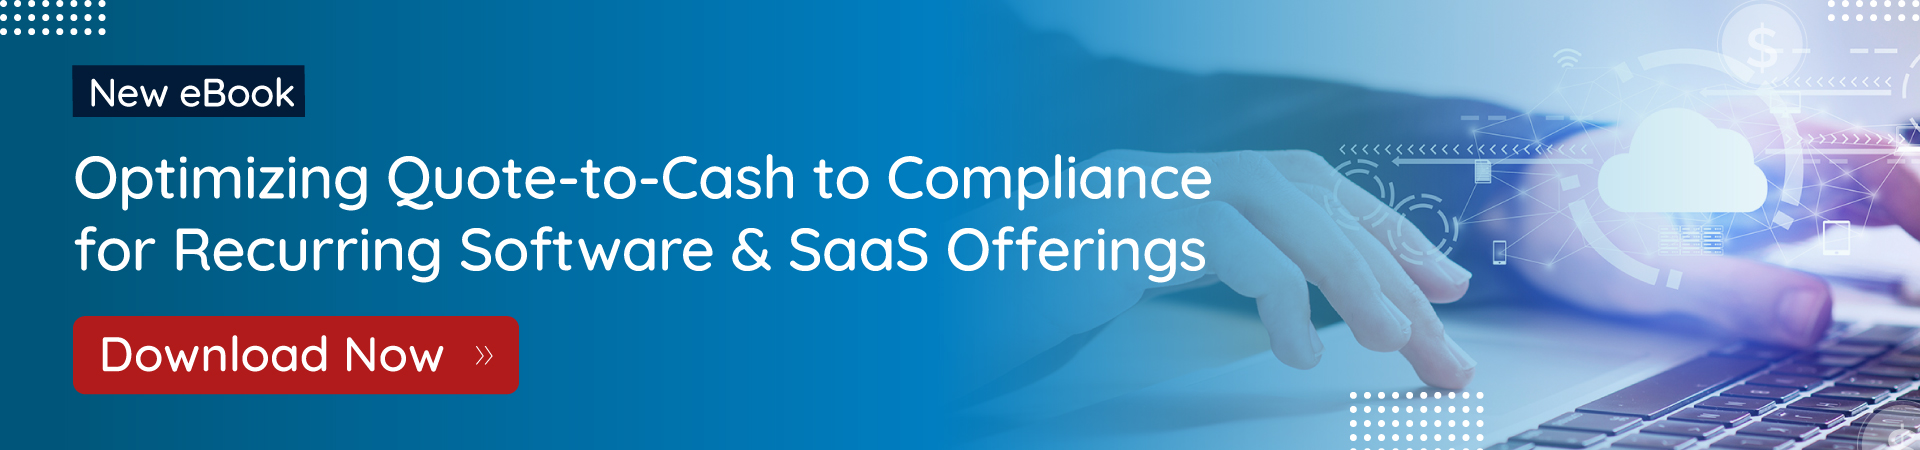 Ebook-Optimizing Quote-to-Cash to Compliance